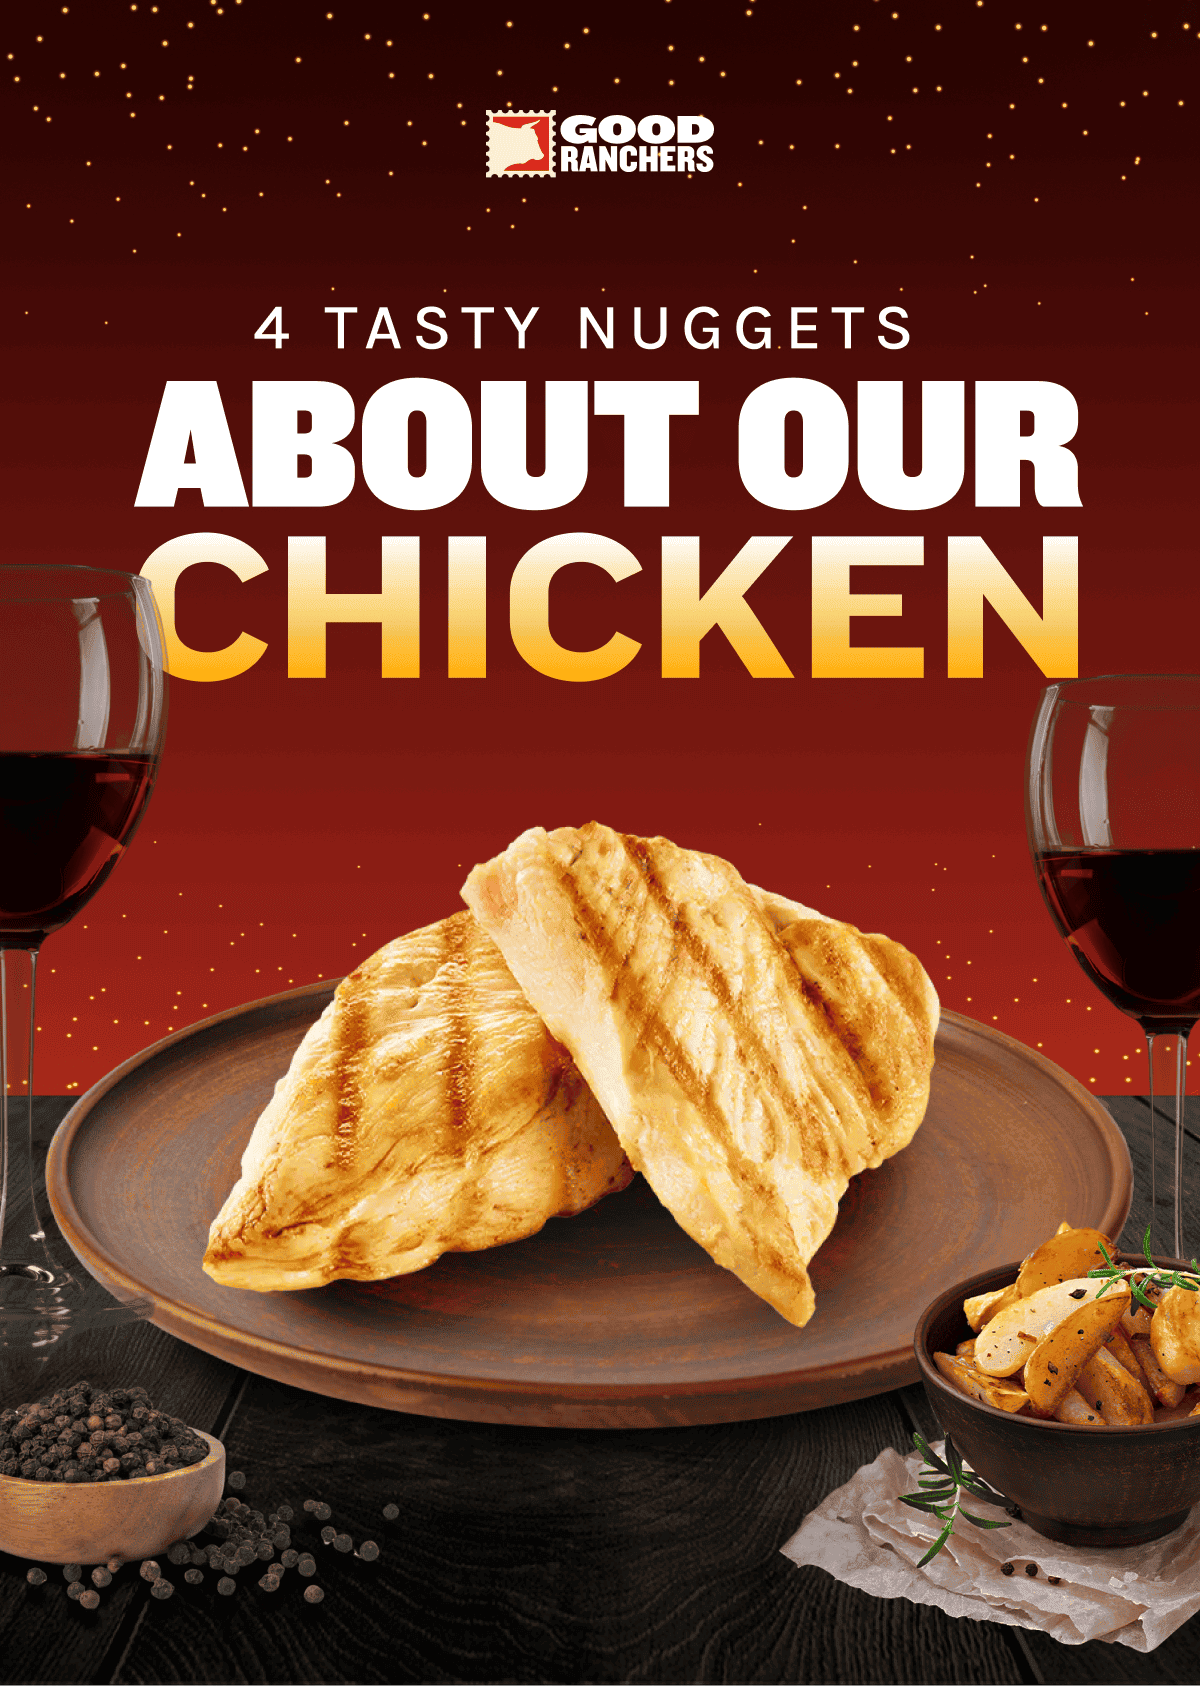 4 tasty nuggets about our chicken